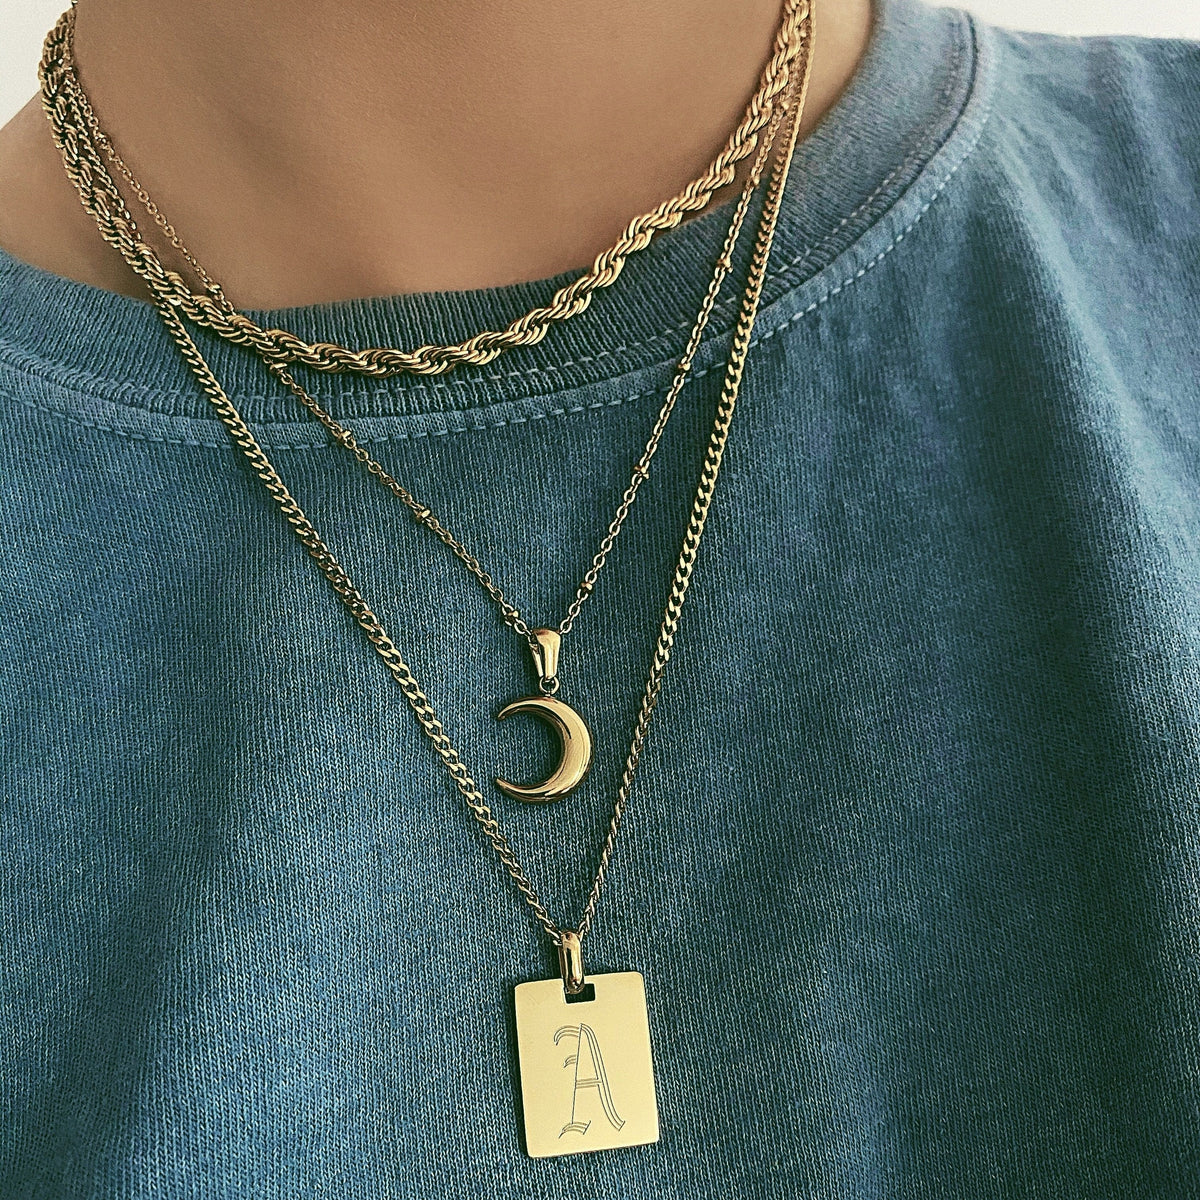 BOHOMOON Stainless Steel Moonlight Necklace